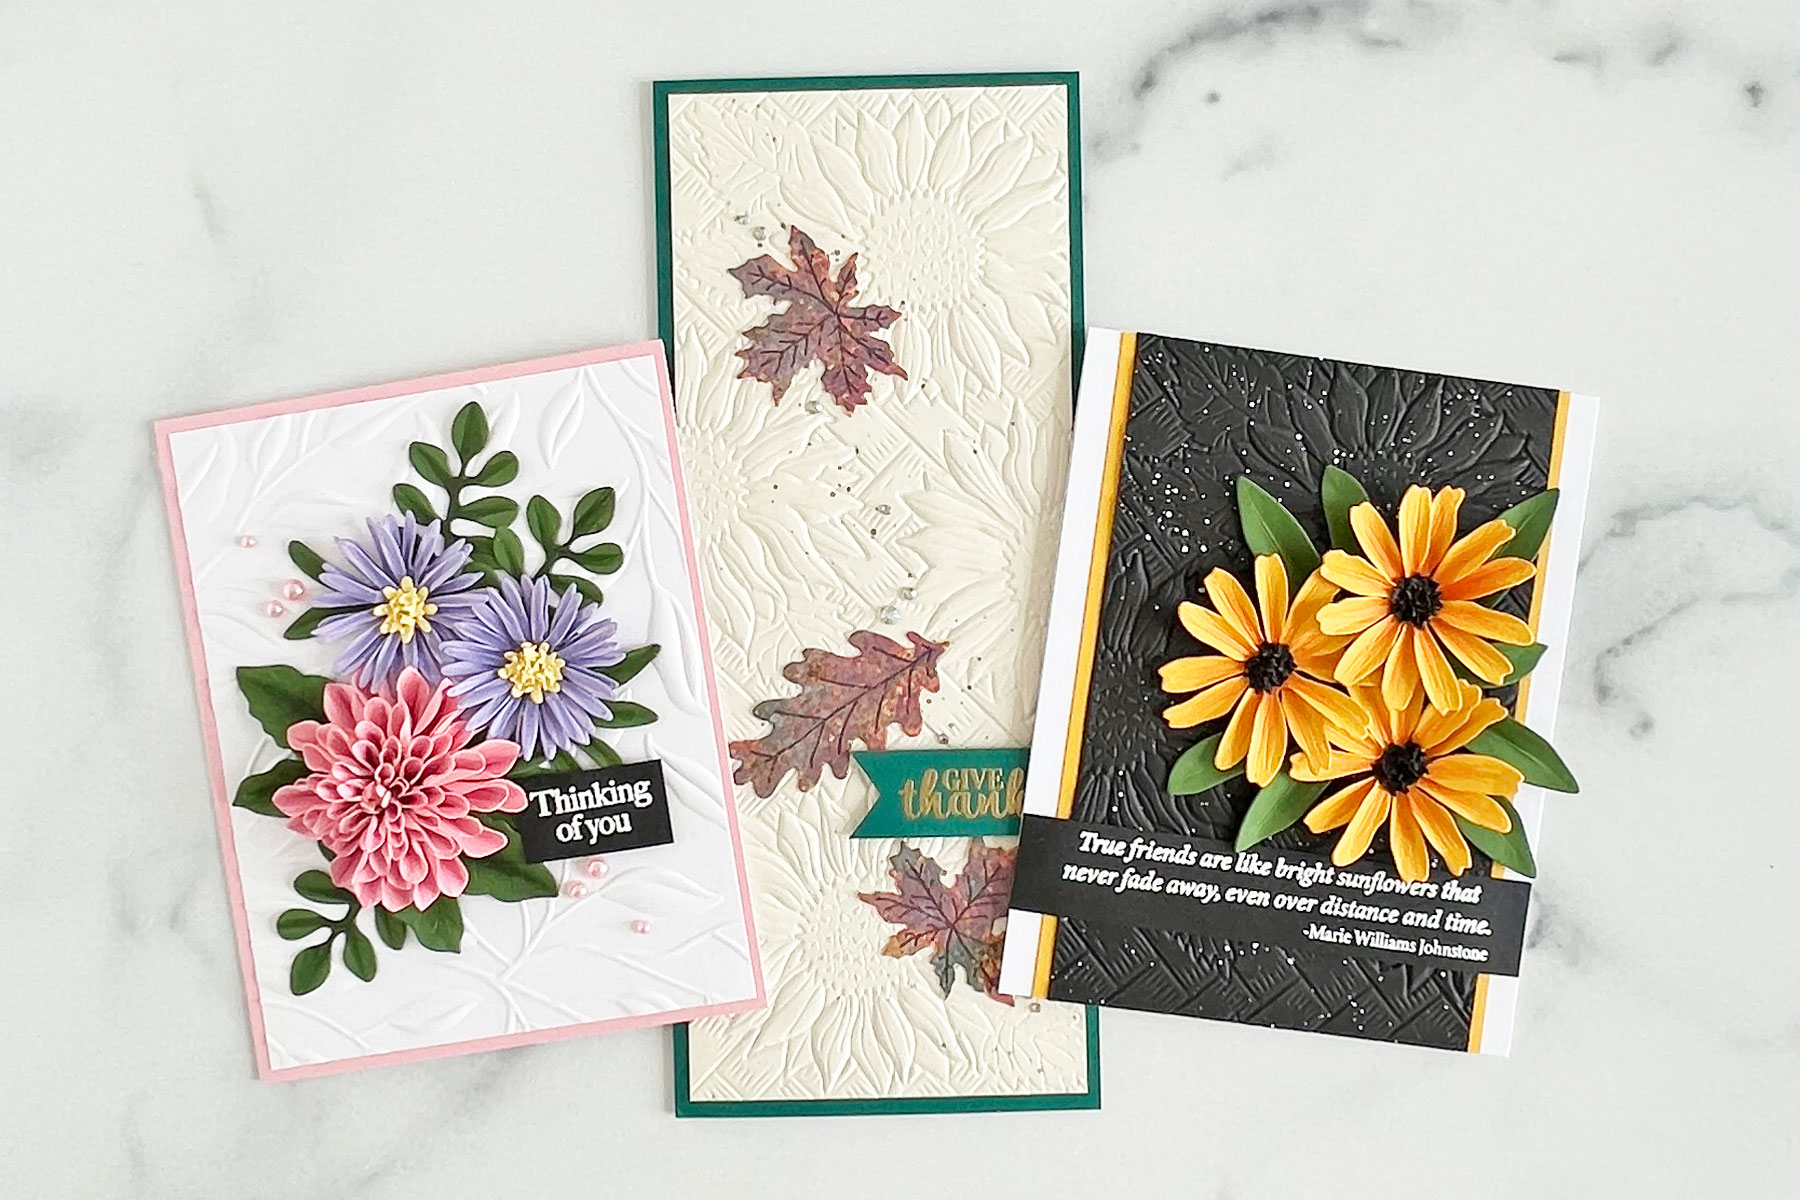 NEW Paper Source Shimmery Magnolia Paper Flower Kit